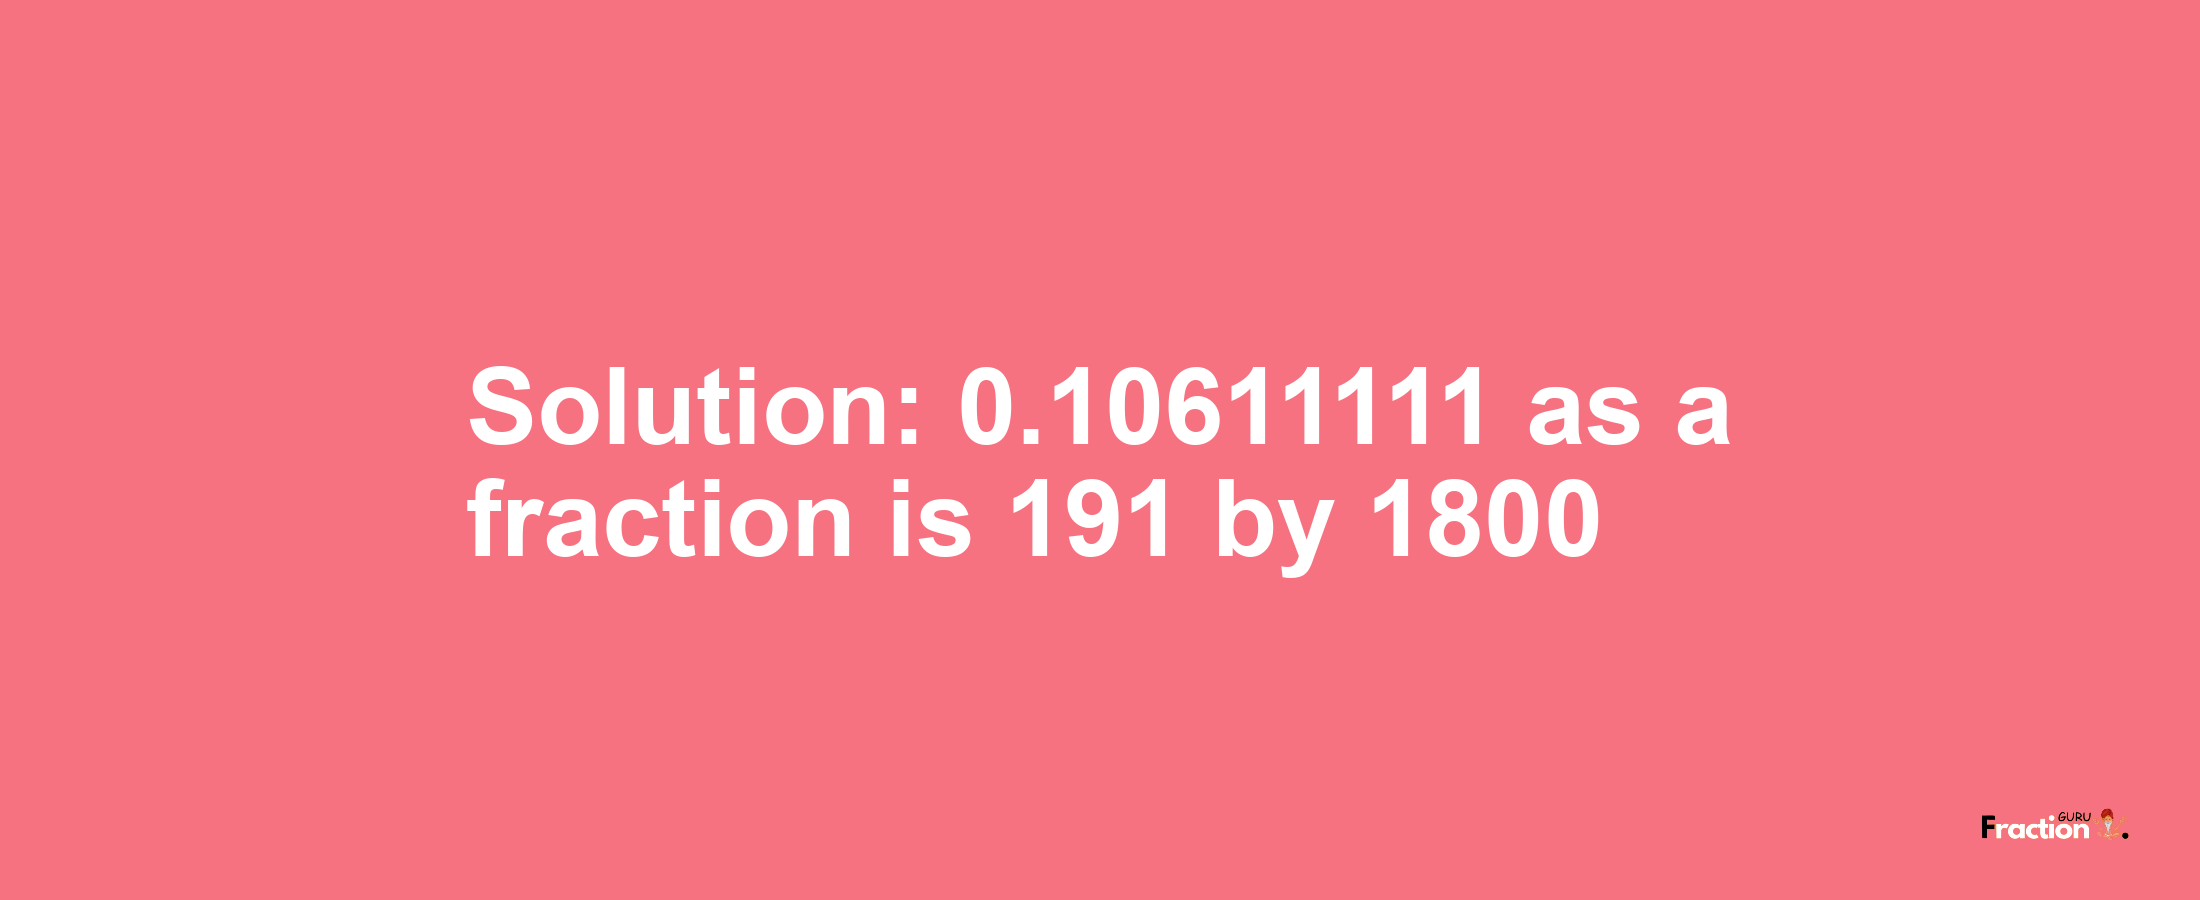 Solution:0.10611111 as a fraction is 191/1800